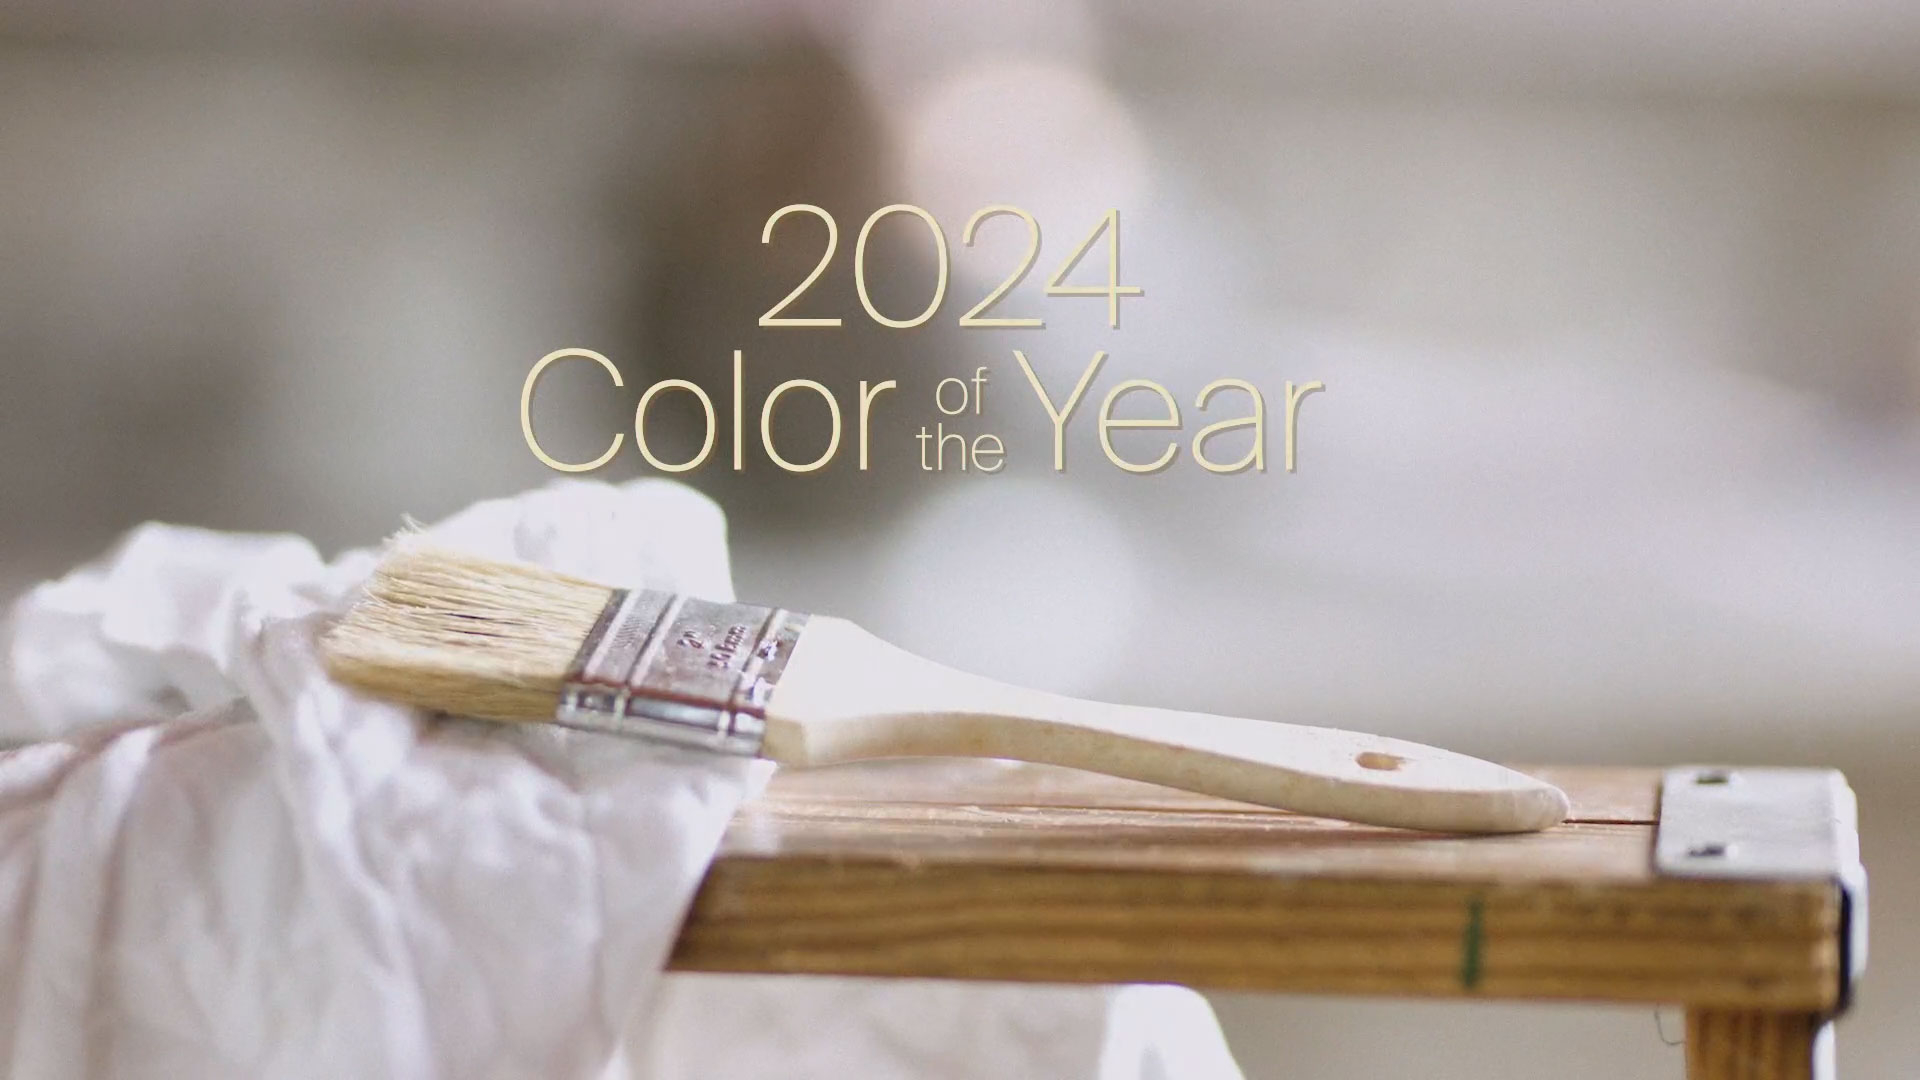 The video weaves color and chorography throughout to celebrate PPG's 2024 Color of the Year, Limitless, while simultaneously connecting the symbolism of color throughout a lifetime to honor the 140th anniversary of the global coatings company.